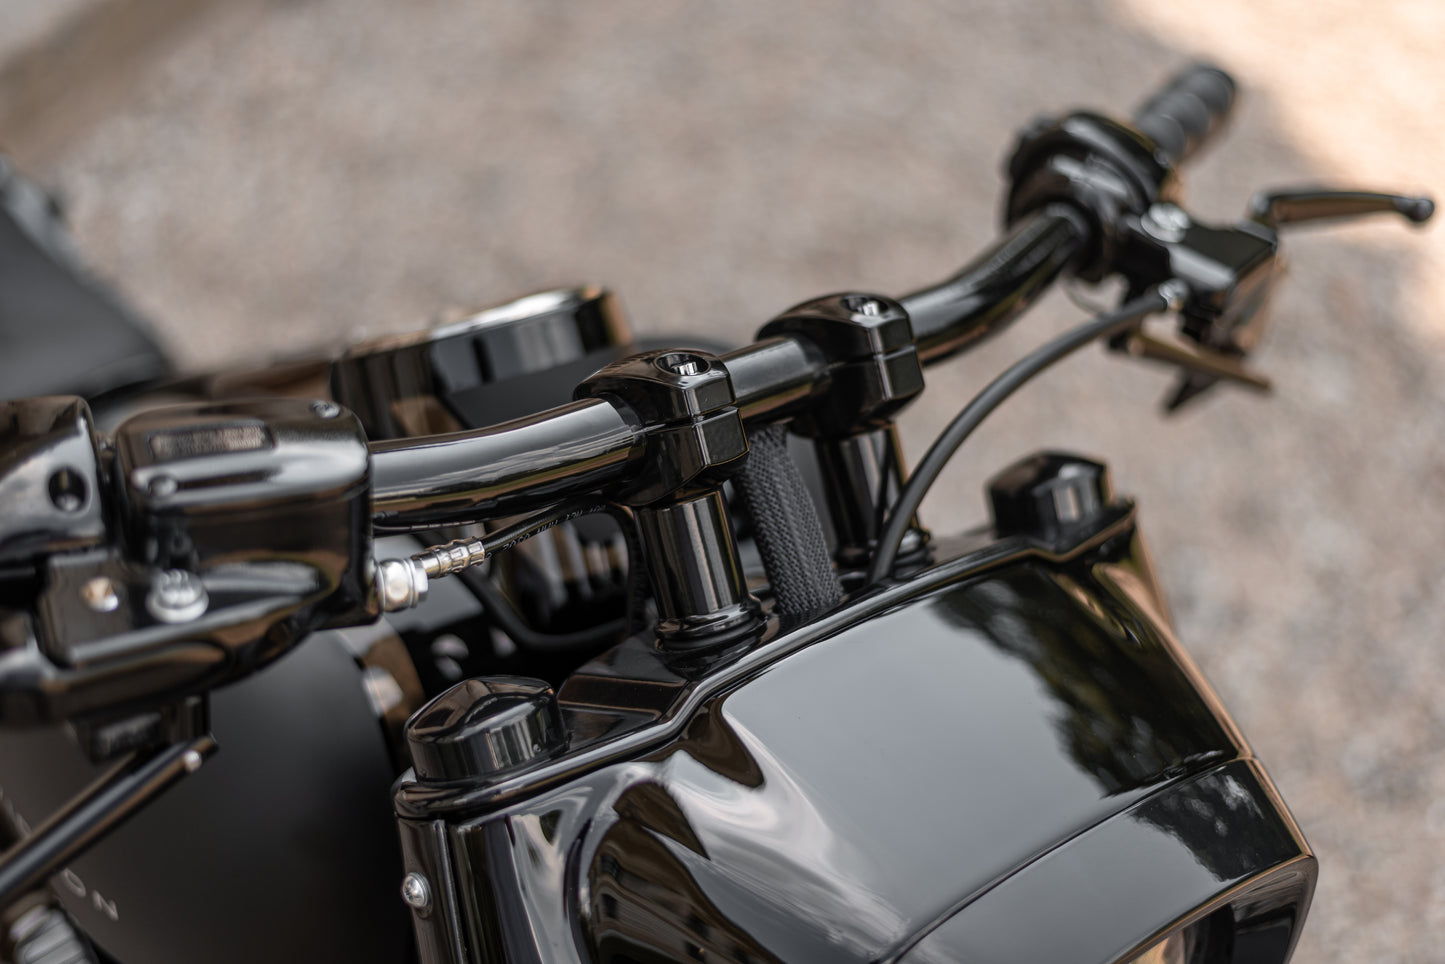 Zoomed Harley Davidson motorcycle with Killer Custom riser set for handlebar from above blurry background